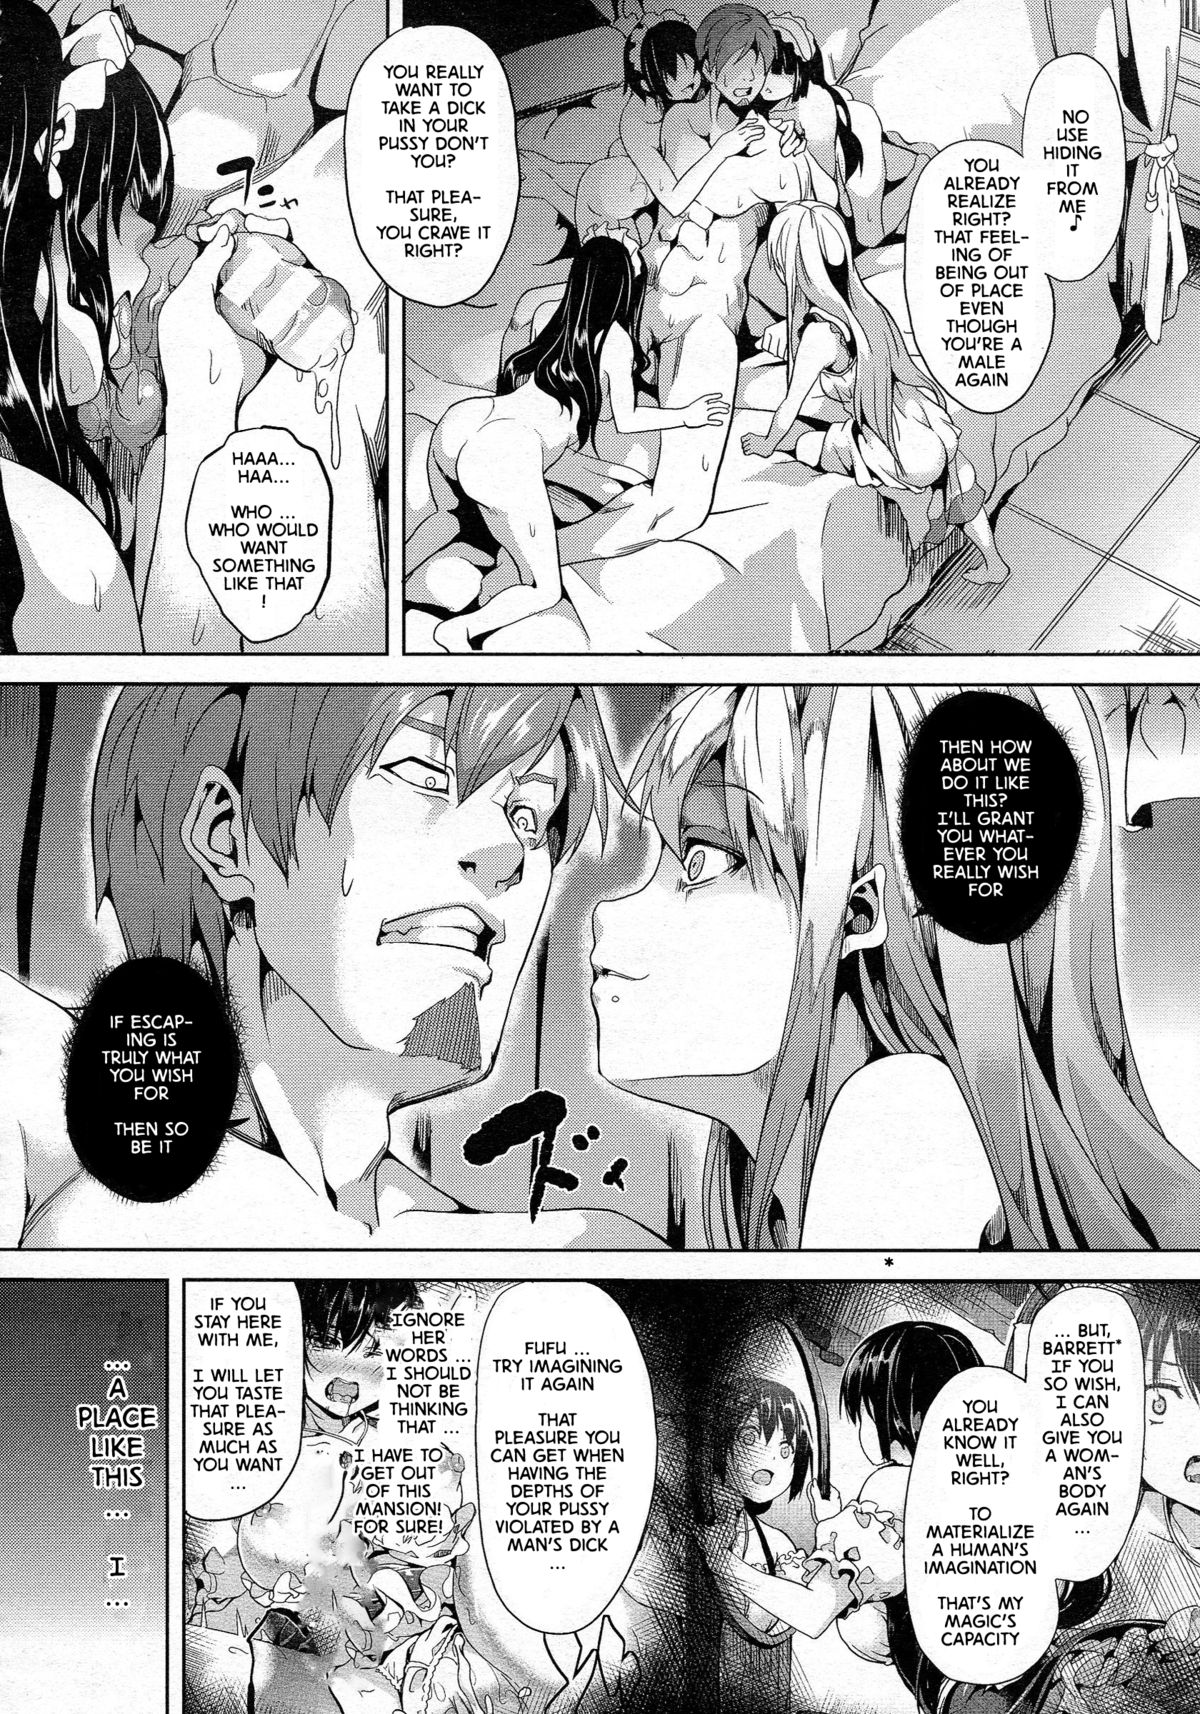 [DATE] Residence Kouhen | Residence Finale (COMIC Unreal 2015-06 Vol. 55) [English] [jabbany] page 4 full